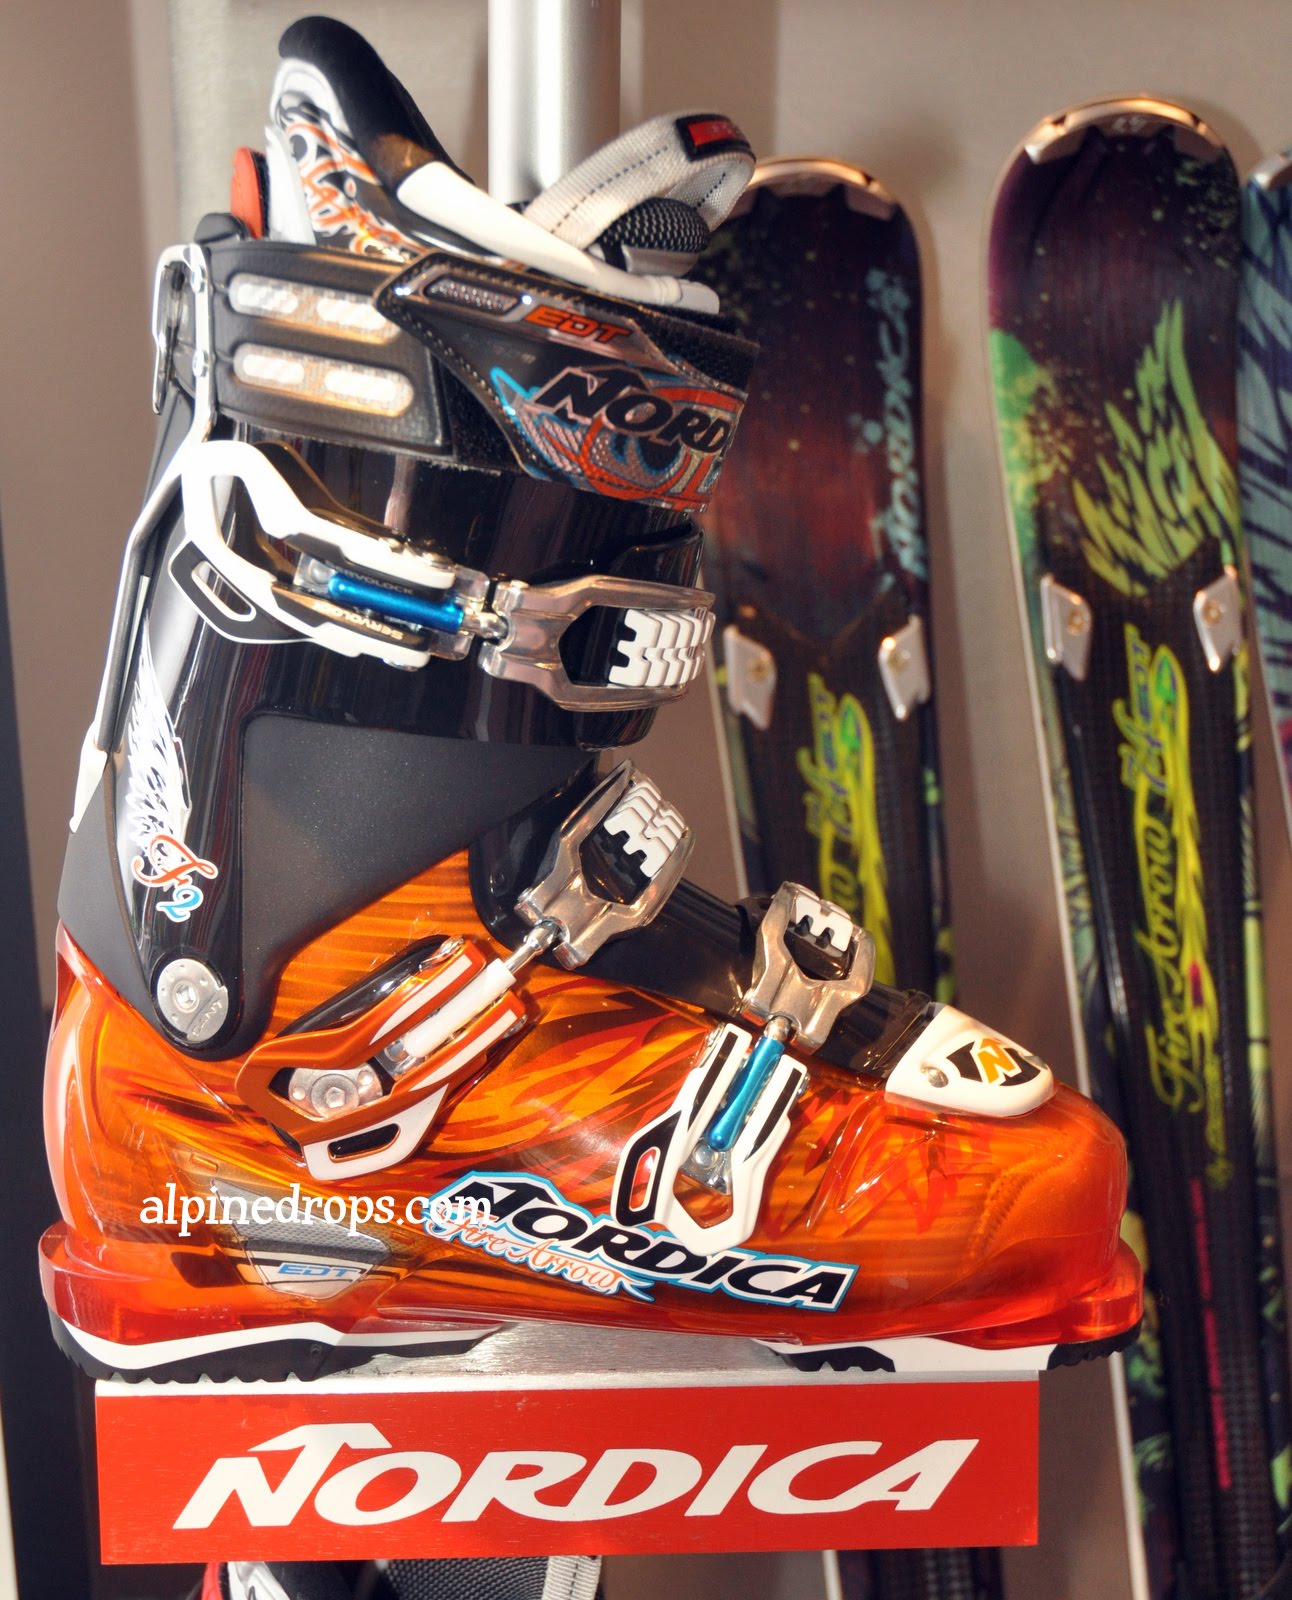 Alpine Ski Shop Daily Drops Nordica Ski Boots Preview 2012 intended for How To Buckle 3 Buckle Ski Boots